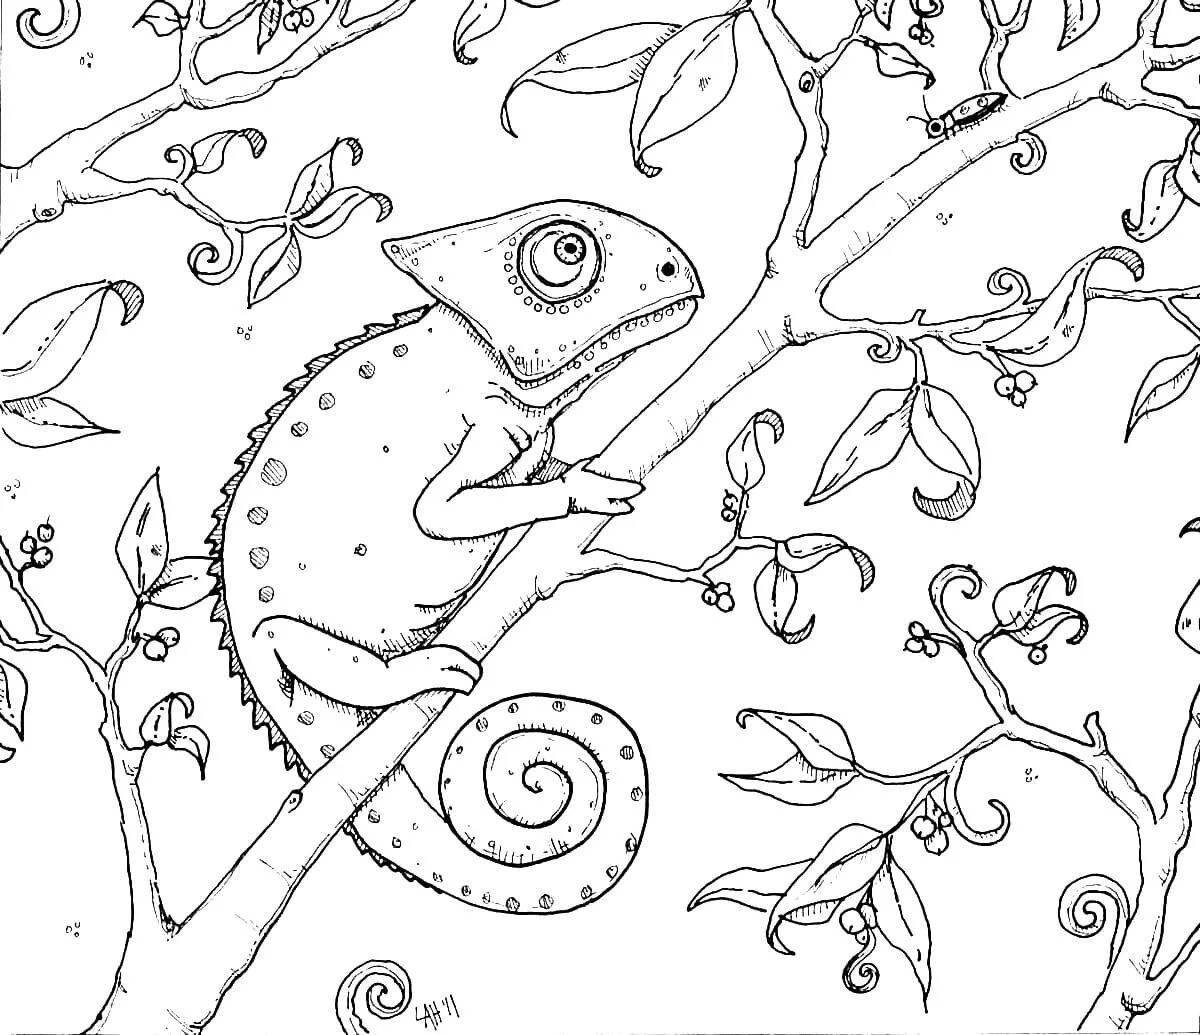 Awesome chameleon coloring book